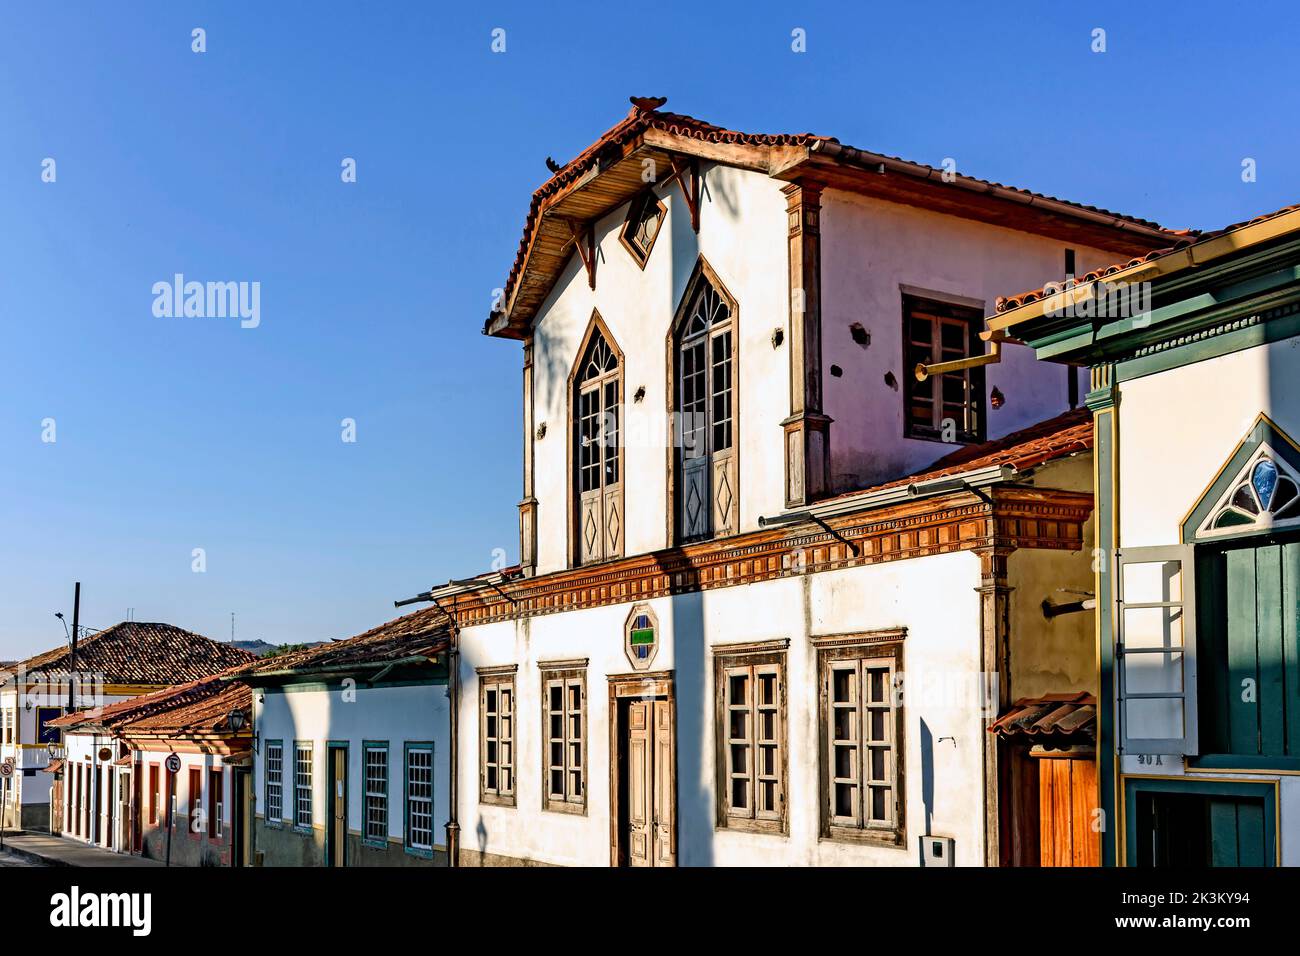 Facades of colonial style streets and houses in the old and historic city of Diamantina in Minas Gerais, Brazil Stock Photo